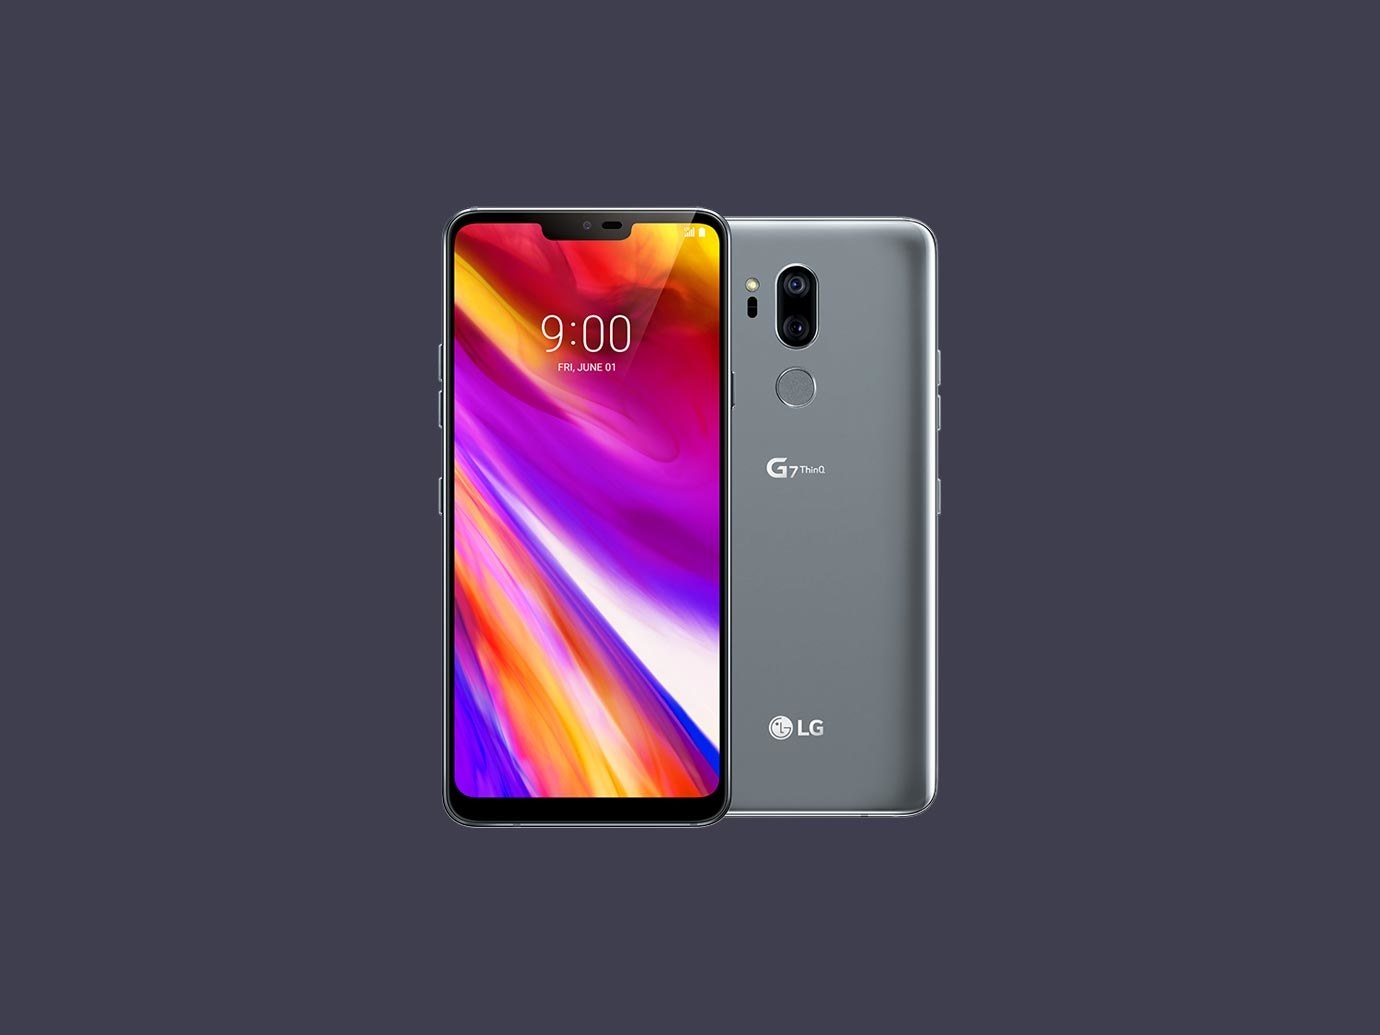 LG G7 ThinQ finally upgraded to Android 9 Pie